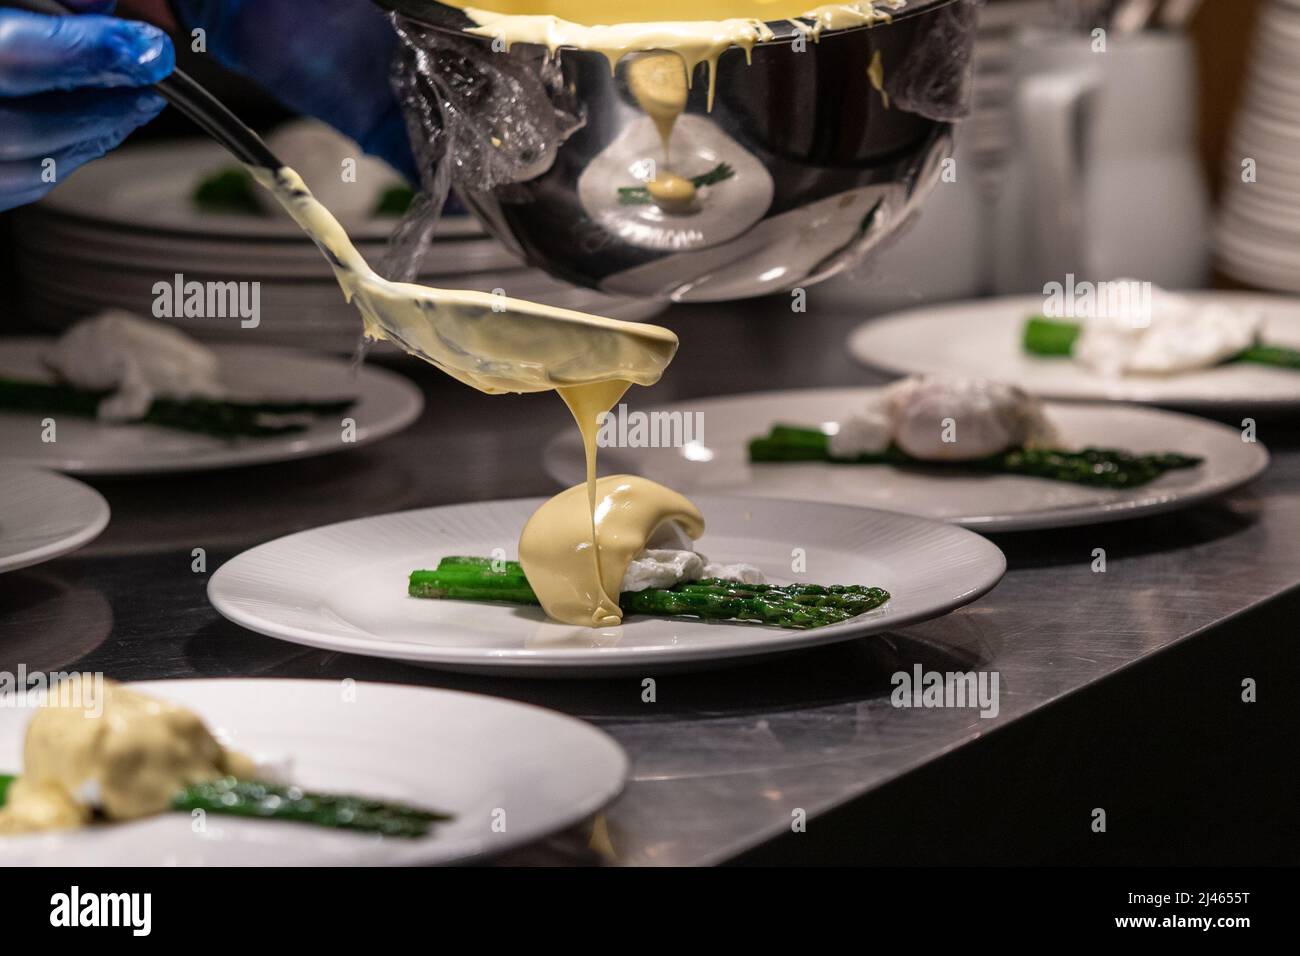 Hollandaise sauce being poured on poached egg and asparagus. Stock Photo